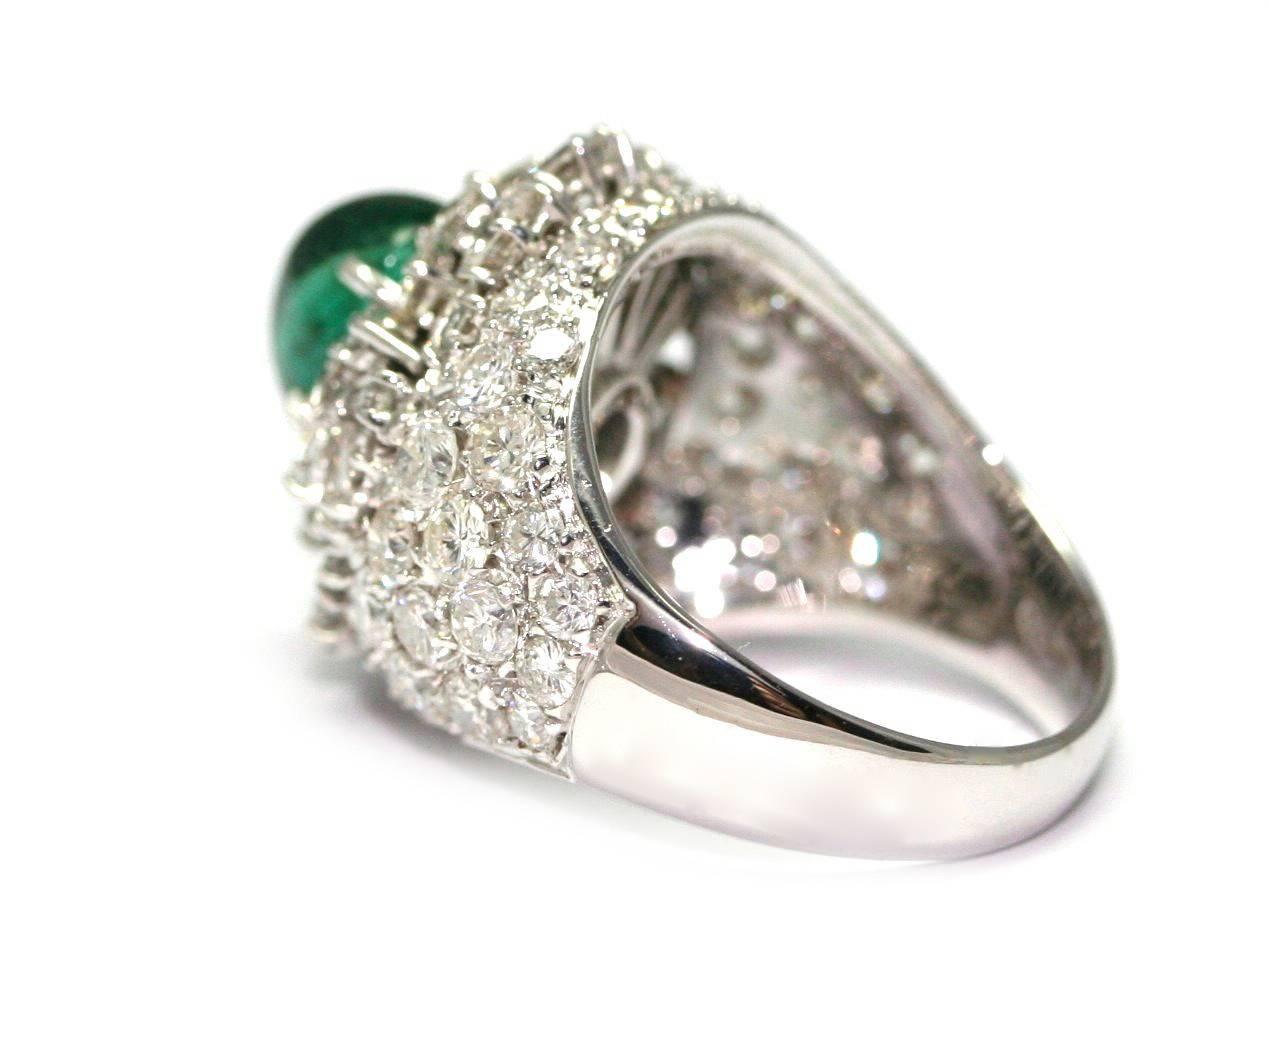 Dome ring set with 5 carats of diamonds and a 2.68 carats sugarloaf emerald For Sale 1